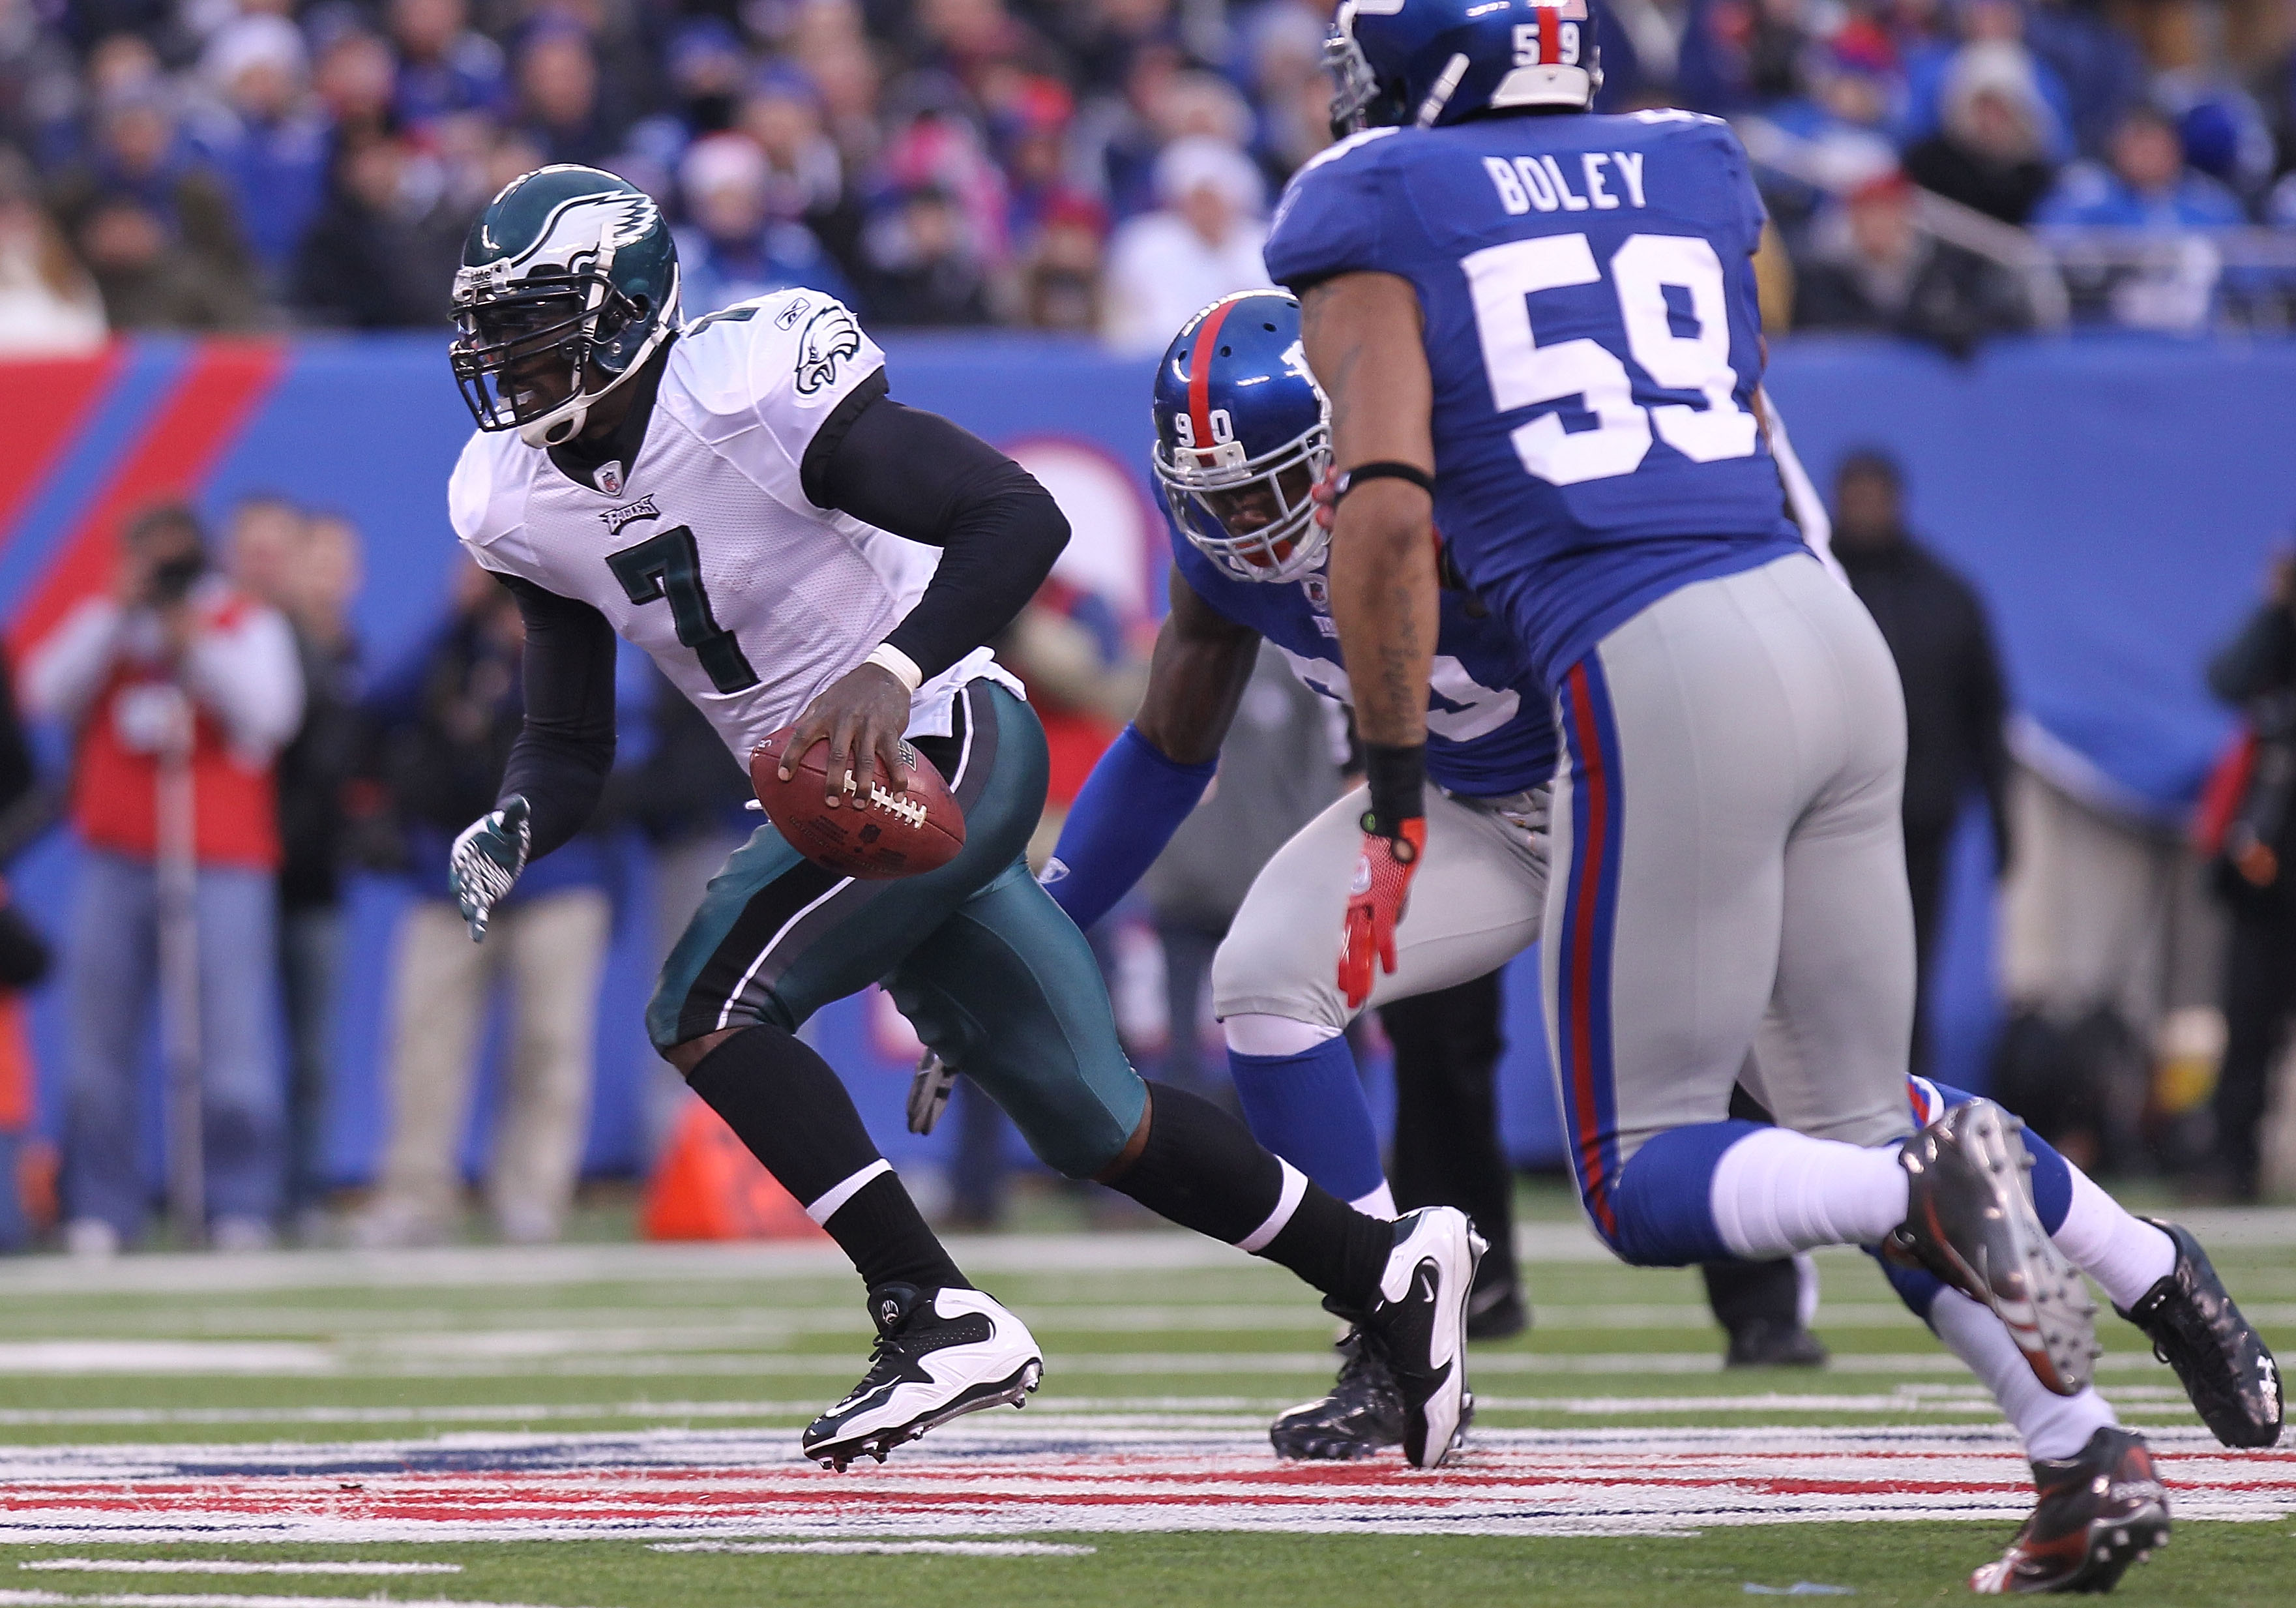 EAST RUTHERFORD, NJ - DECEMBER 19:  Michael Vick #7 of the Philadelphia Eagles rushes against the New York Giants at New Meadowlands Stadium on December 19, 2010 in East Rutherford, New Jersey.  (Photo by Nick Laham/Getty Images)